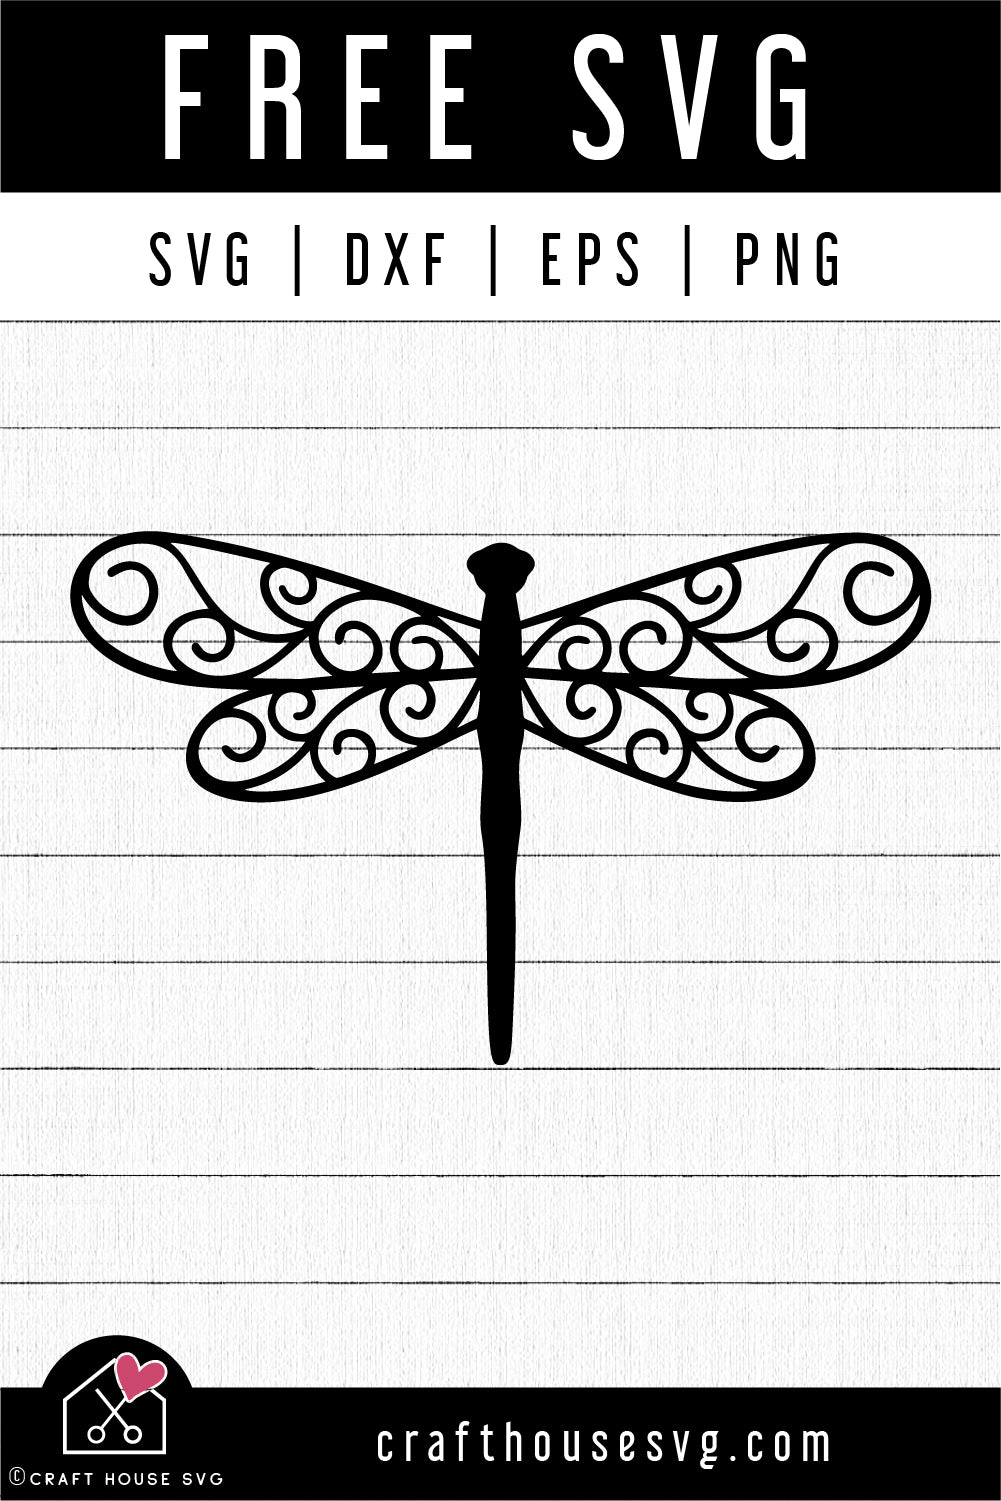 FREE Dragonfly SVG cut file - Craft House SVG